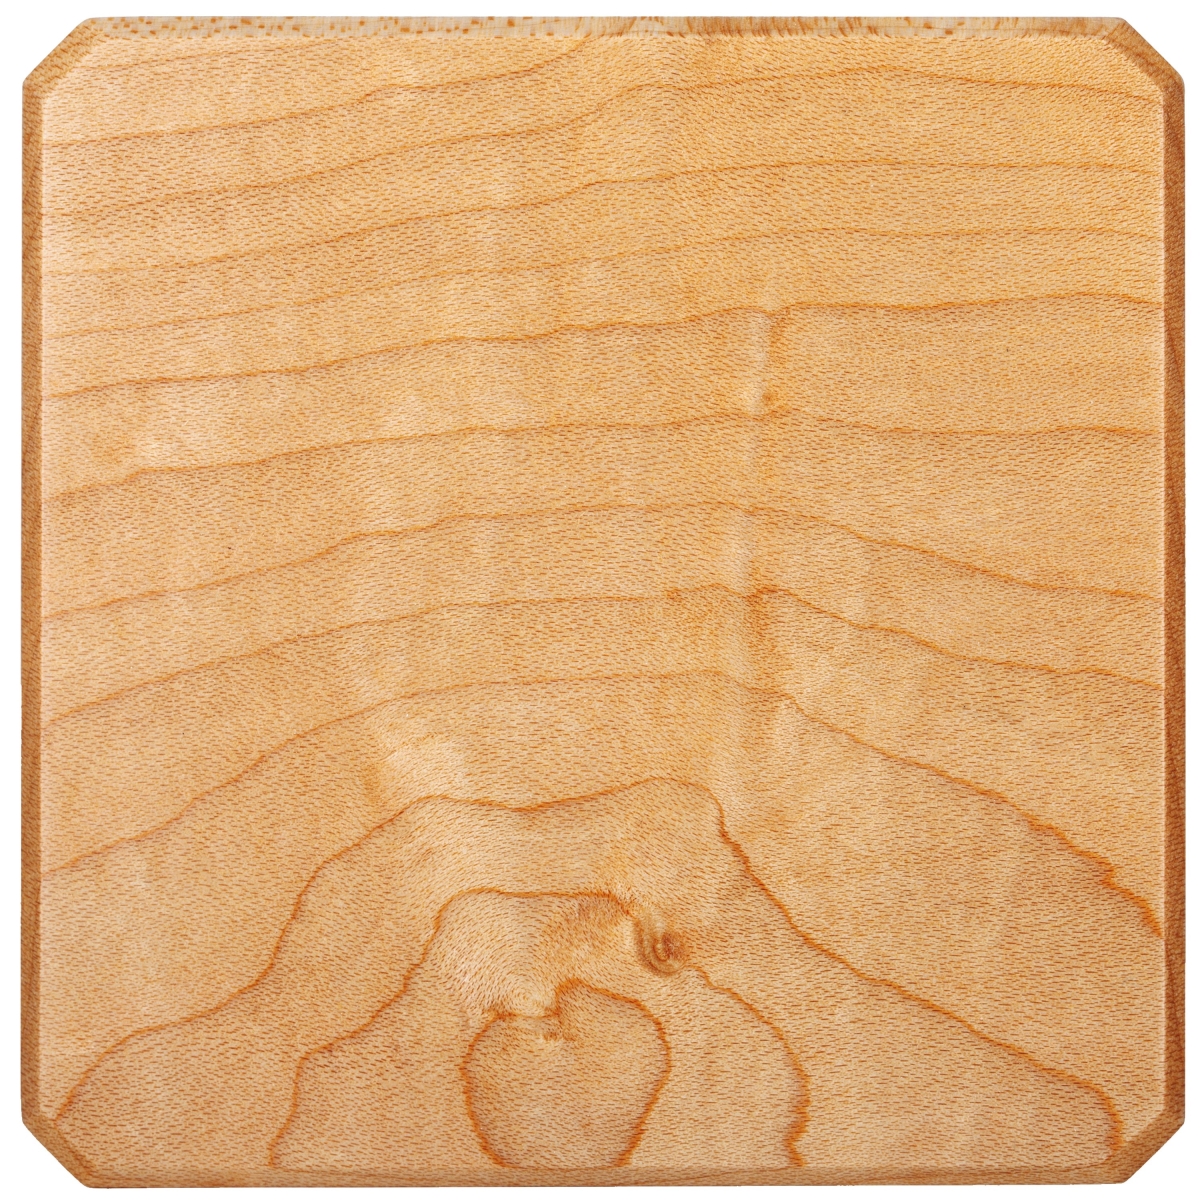 Picture of A & E Millwork AEM-5051 Sinlge Cherry Wood Coasters